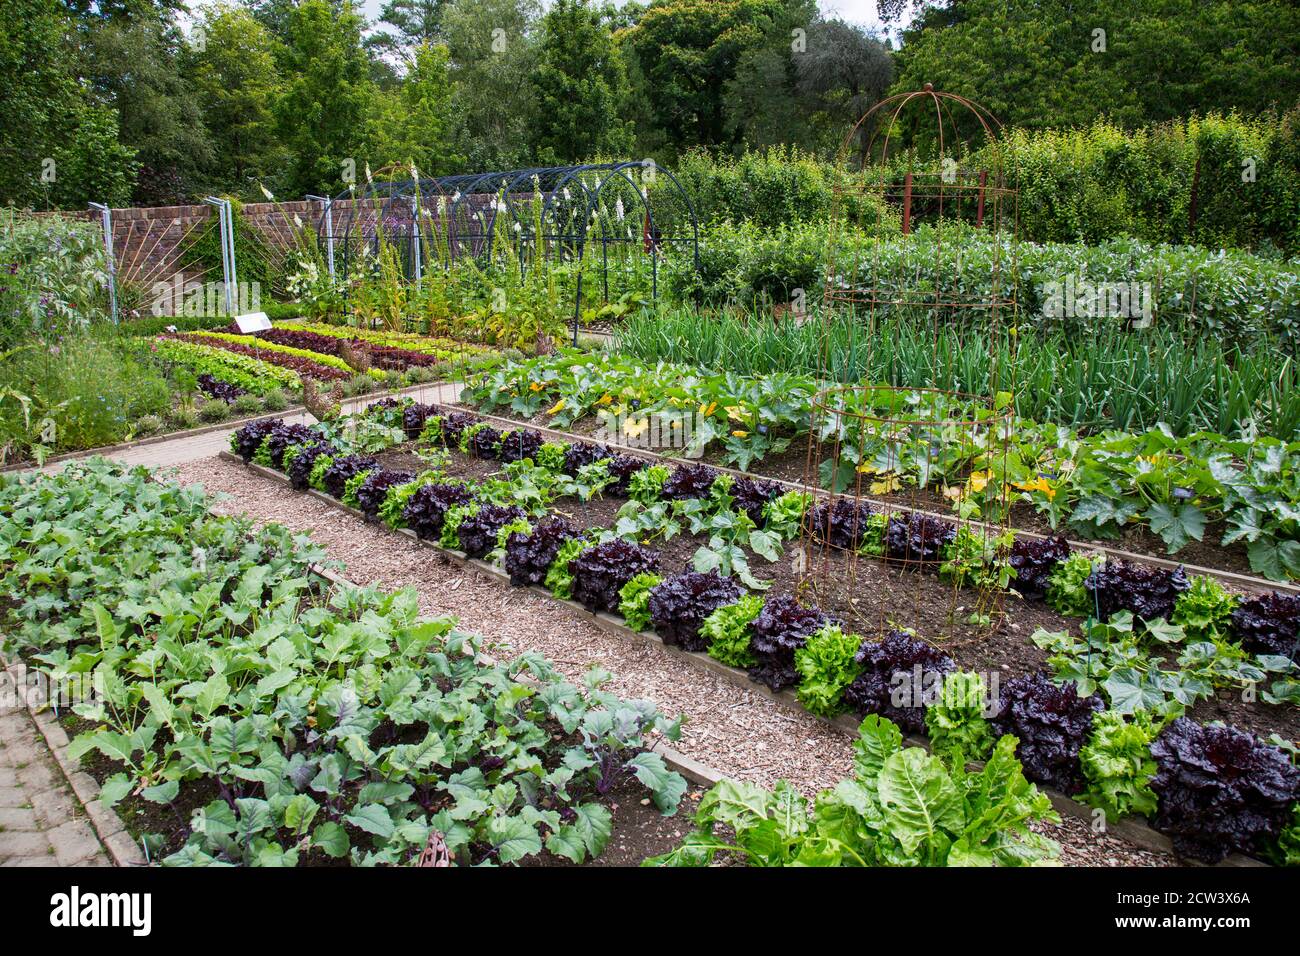 Neat and colourful rows of vegetables in the Vegetable Garden at RHS Rosemoor, Great Torrington, Devon, England, UK Stock Photo